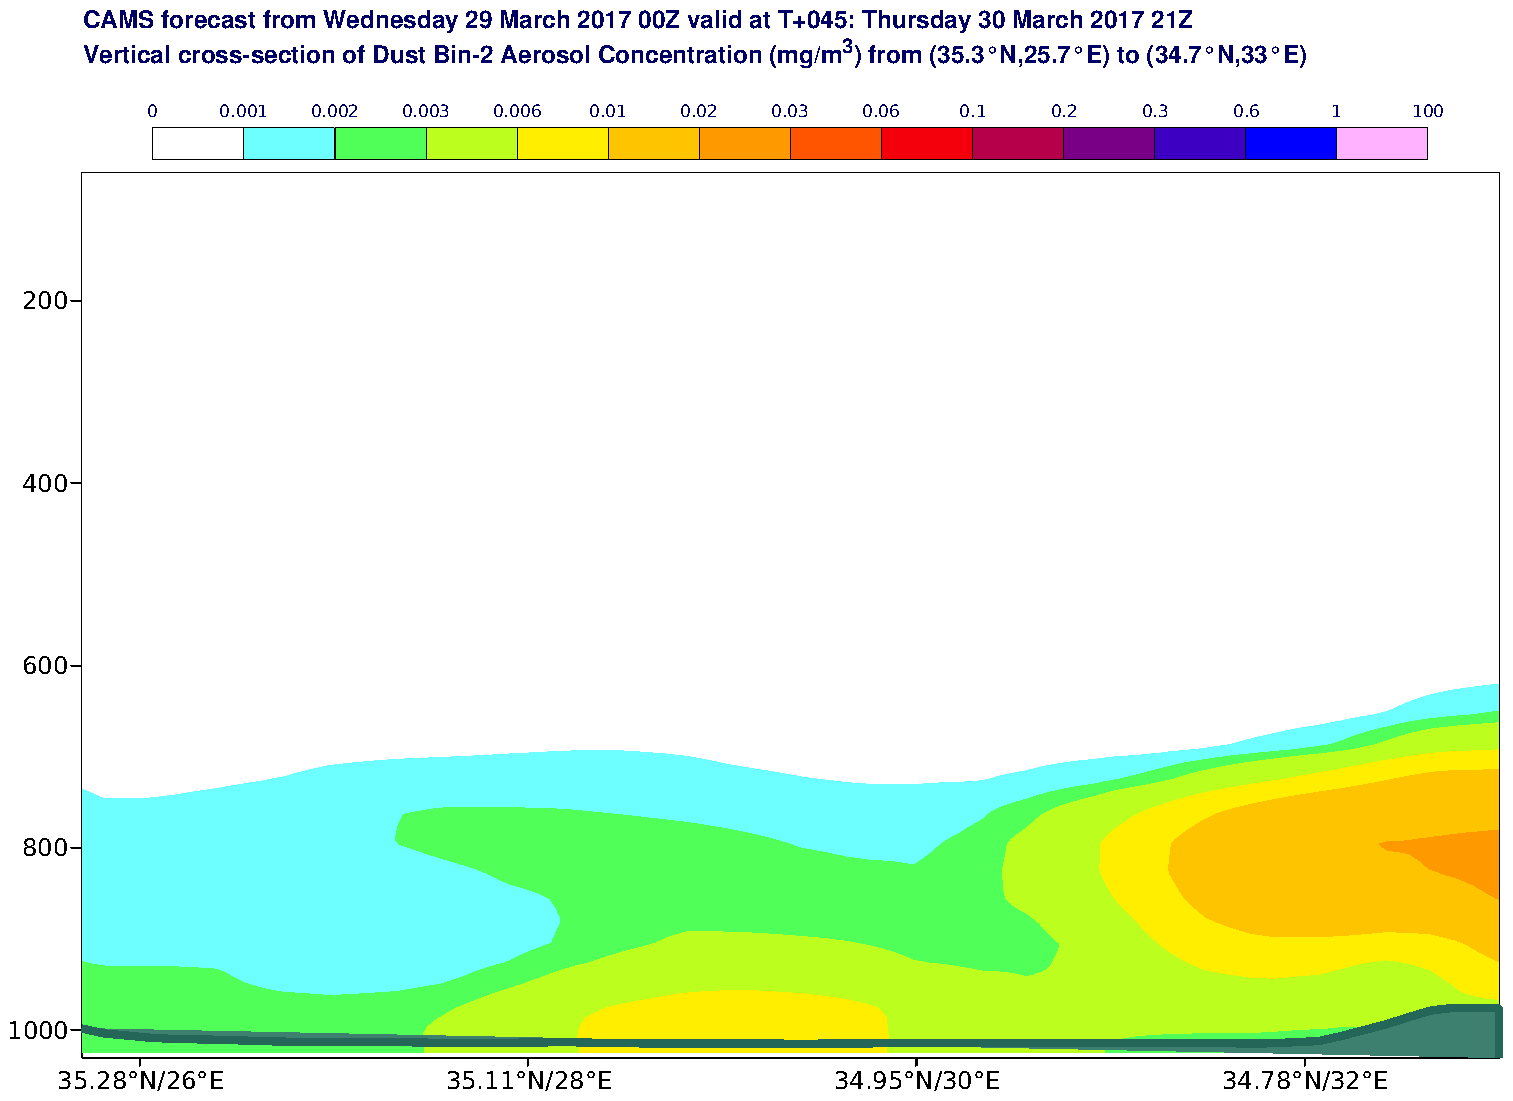 Vertical cross-section of Dust Bin-2 Aerosol Concentration (mg/m3) valid at T45 - 2017-03-30 21:00